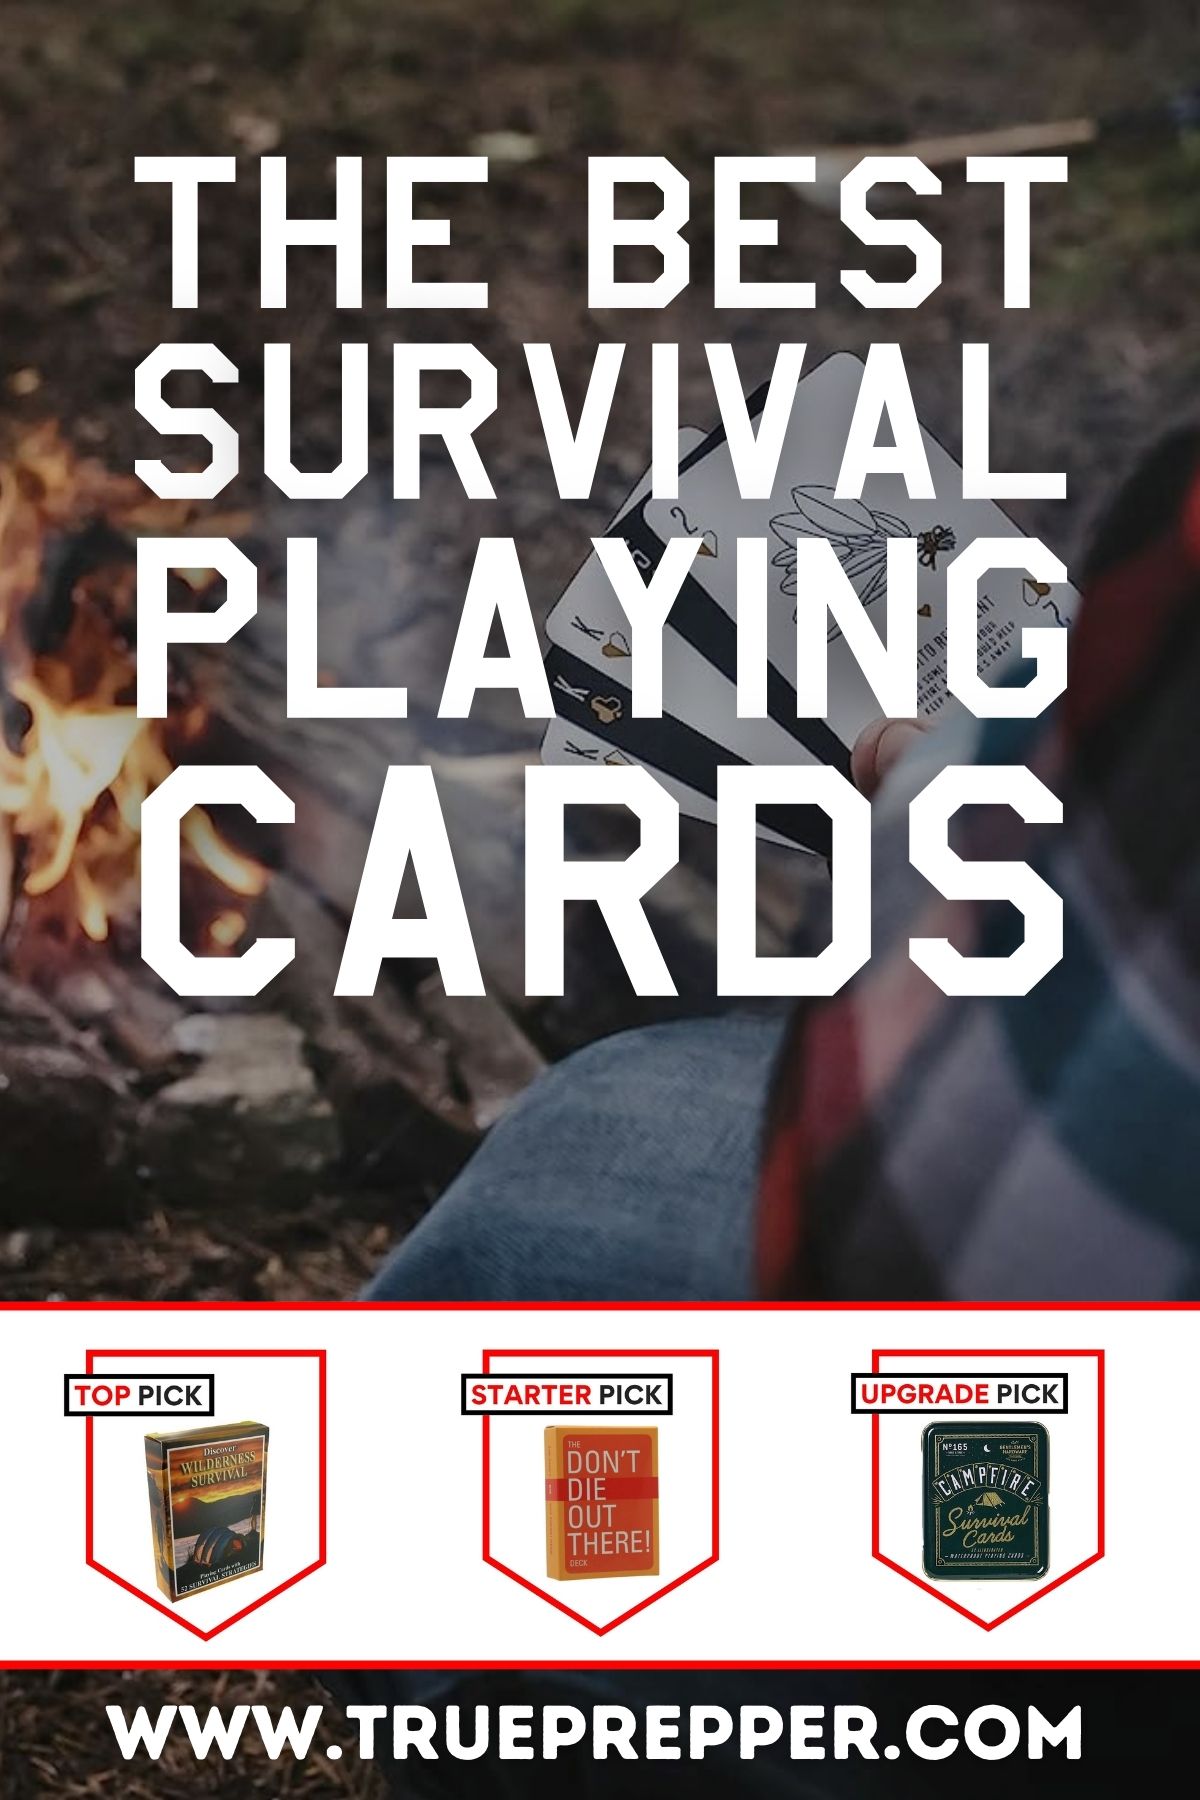 The Best Survival Playing Cards